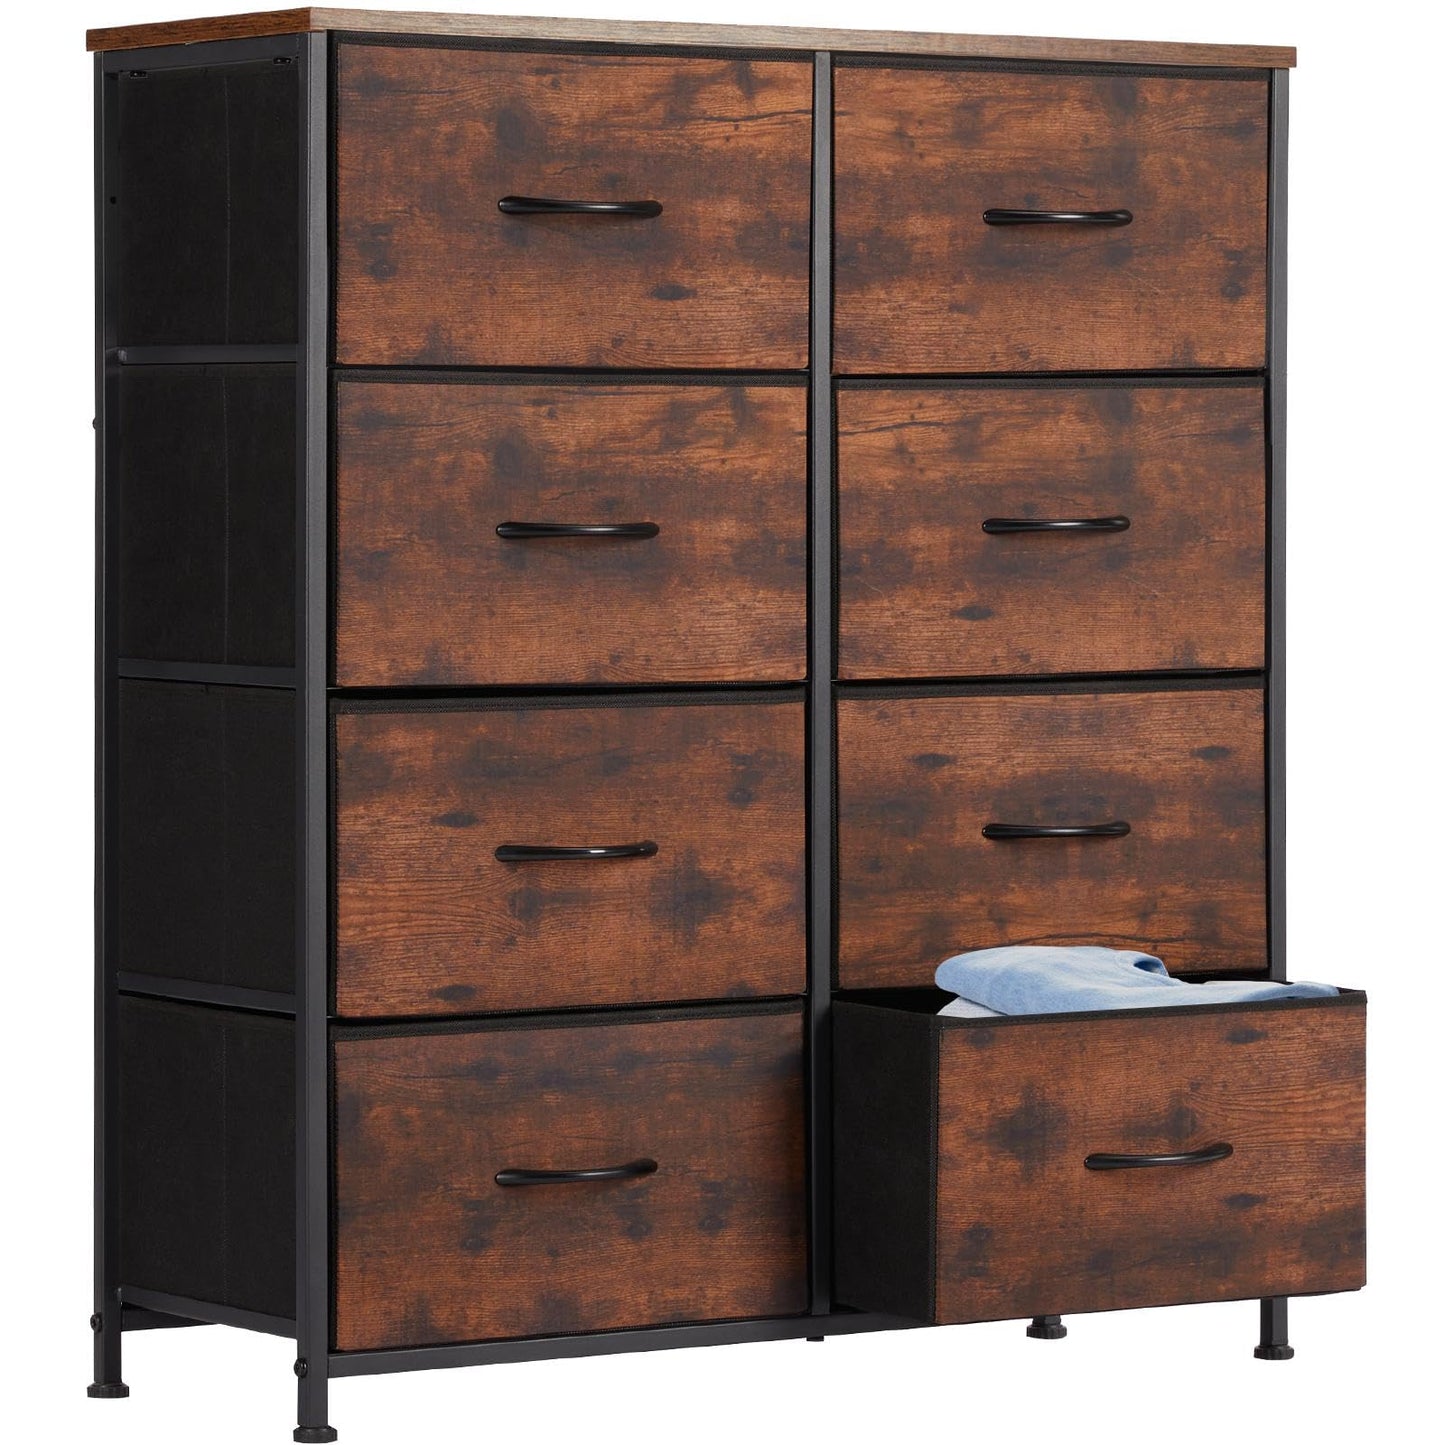 Dresser, Dresser for Bedroom Drawer Organizer Storage Drawers, Fabric Storage Tower with 8 Drawers, Chest of Drawers with Steel Frame, Wood Top